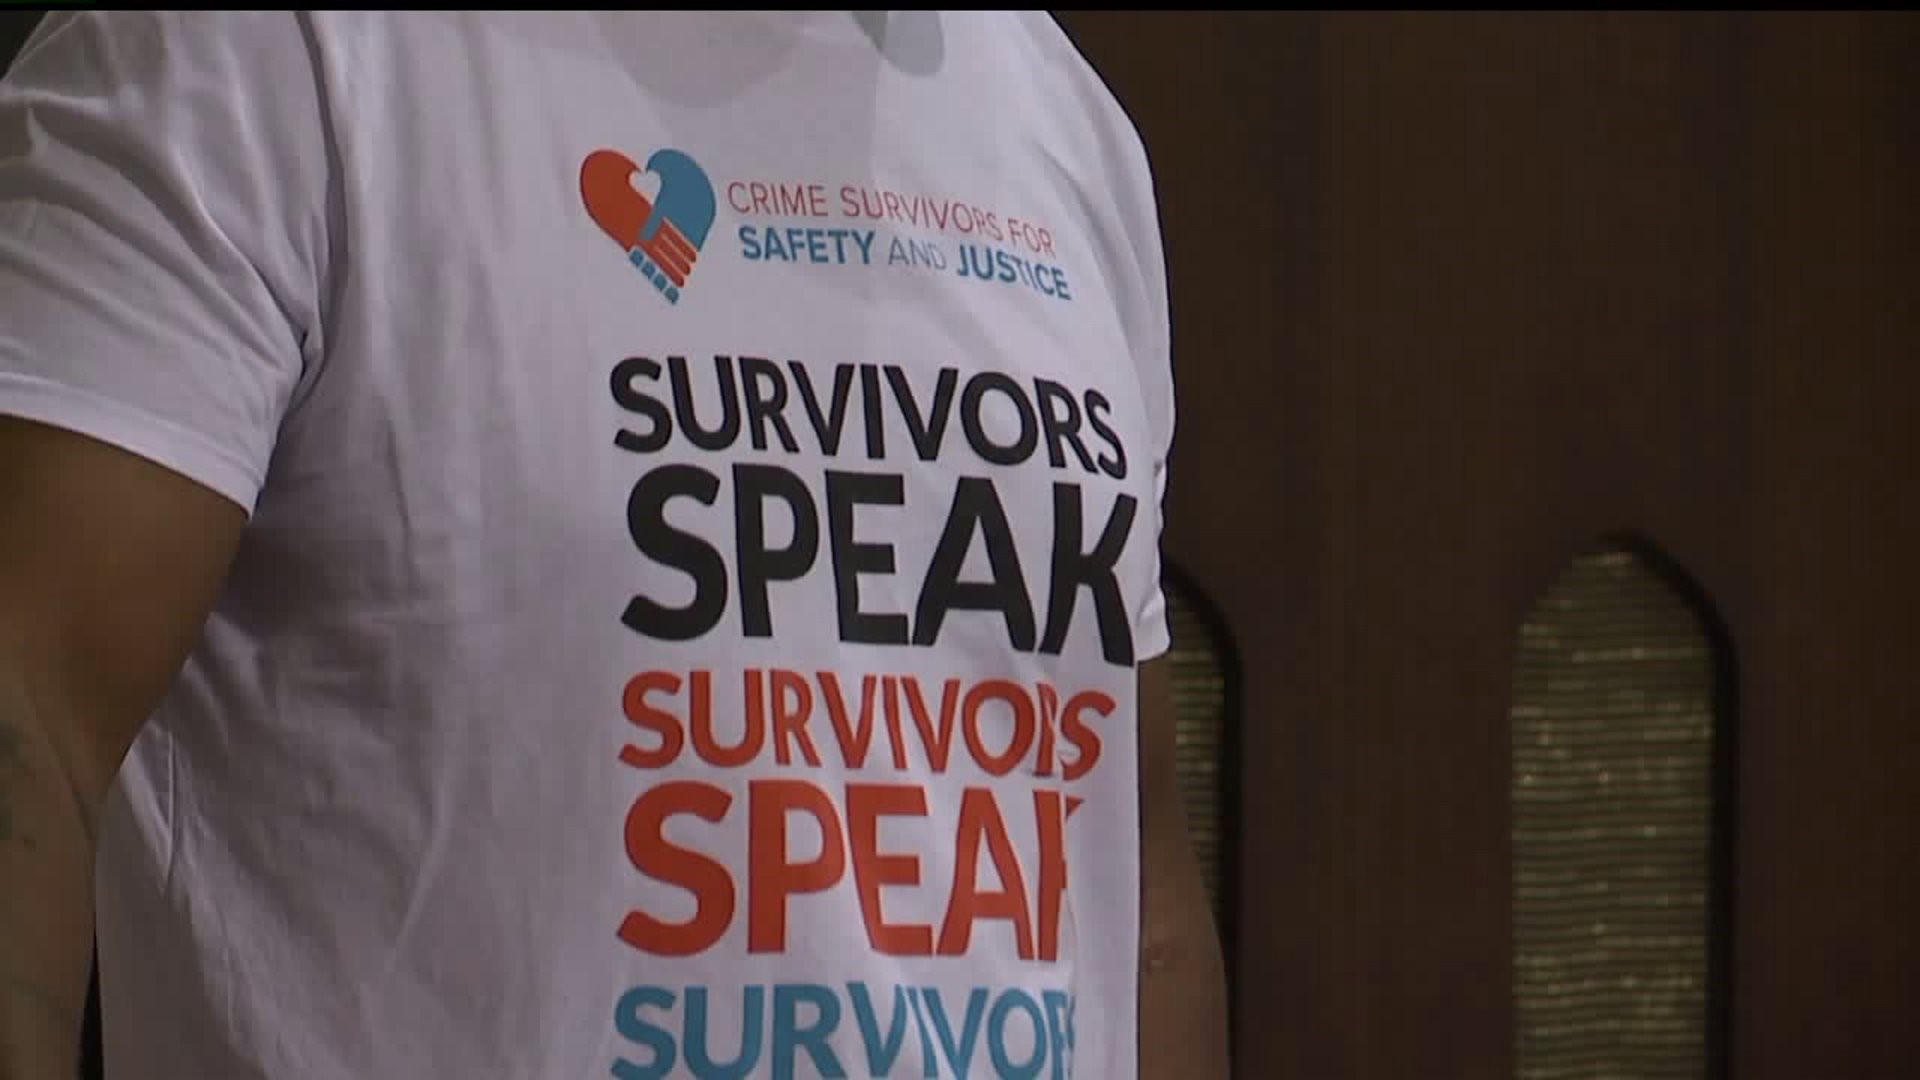 Crime survivors gather to call on lawmakers to make change